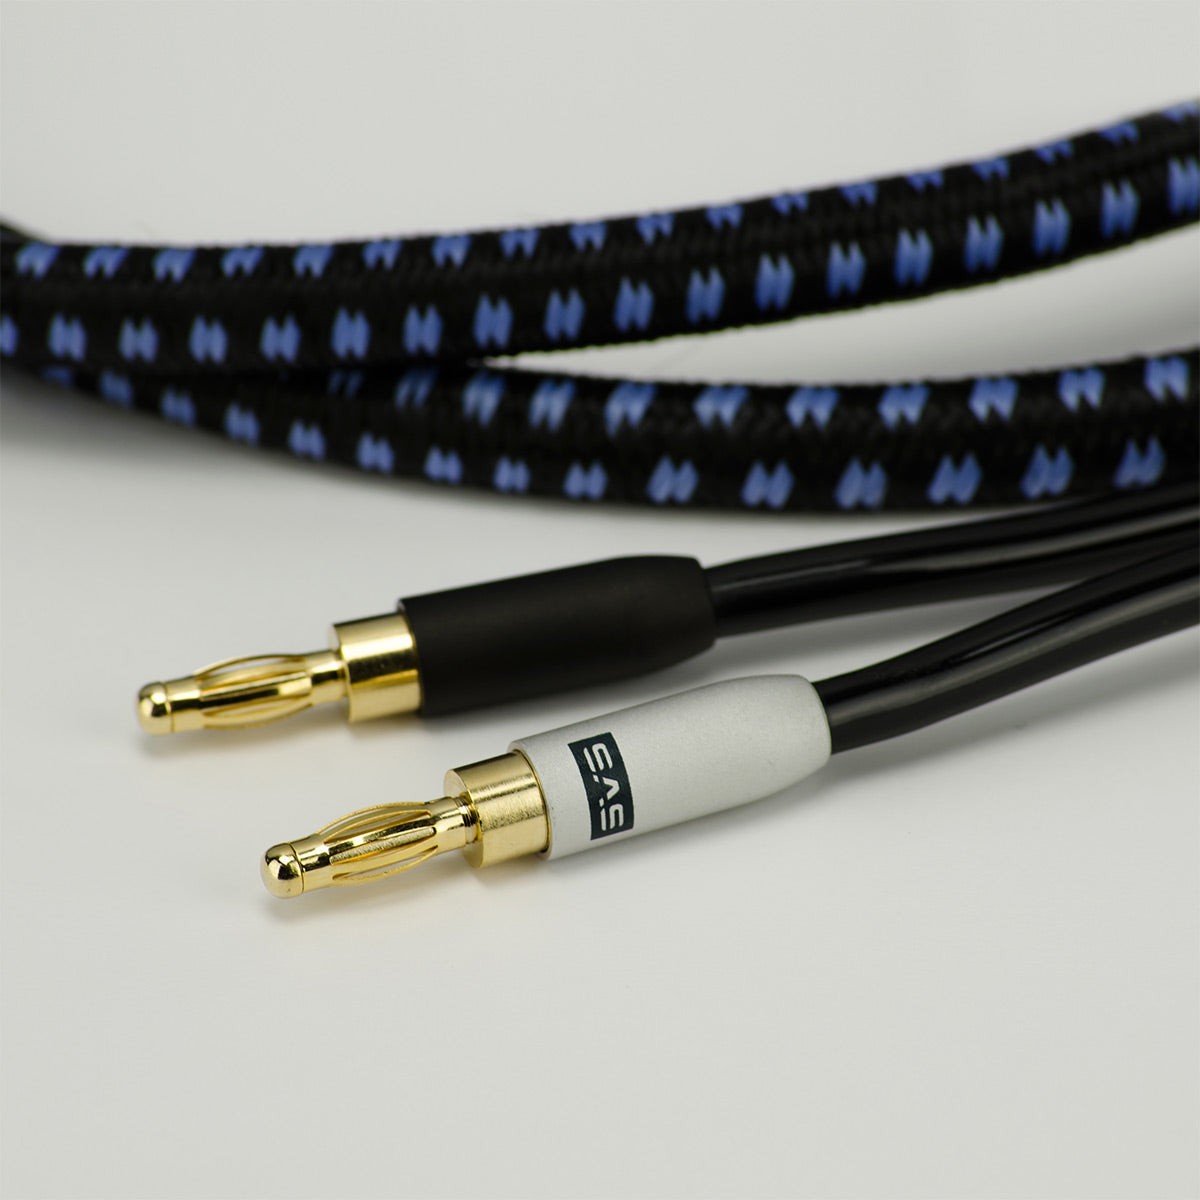 SVS SoundPath Ultra Speaker Cable (15 ft) - Each